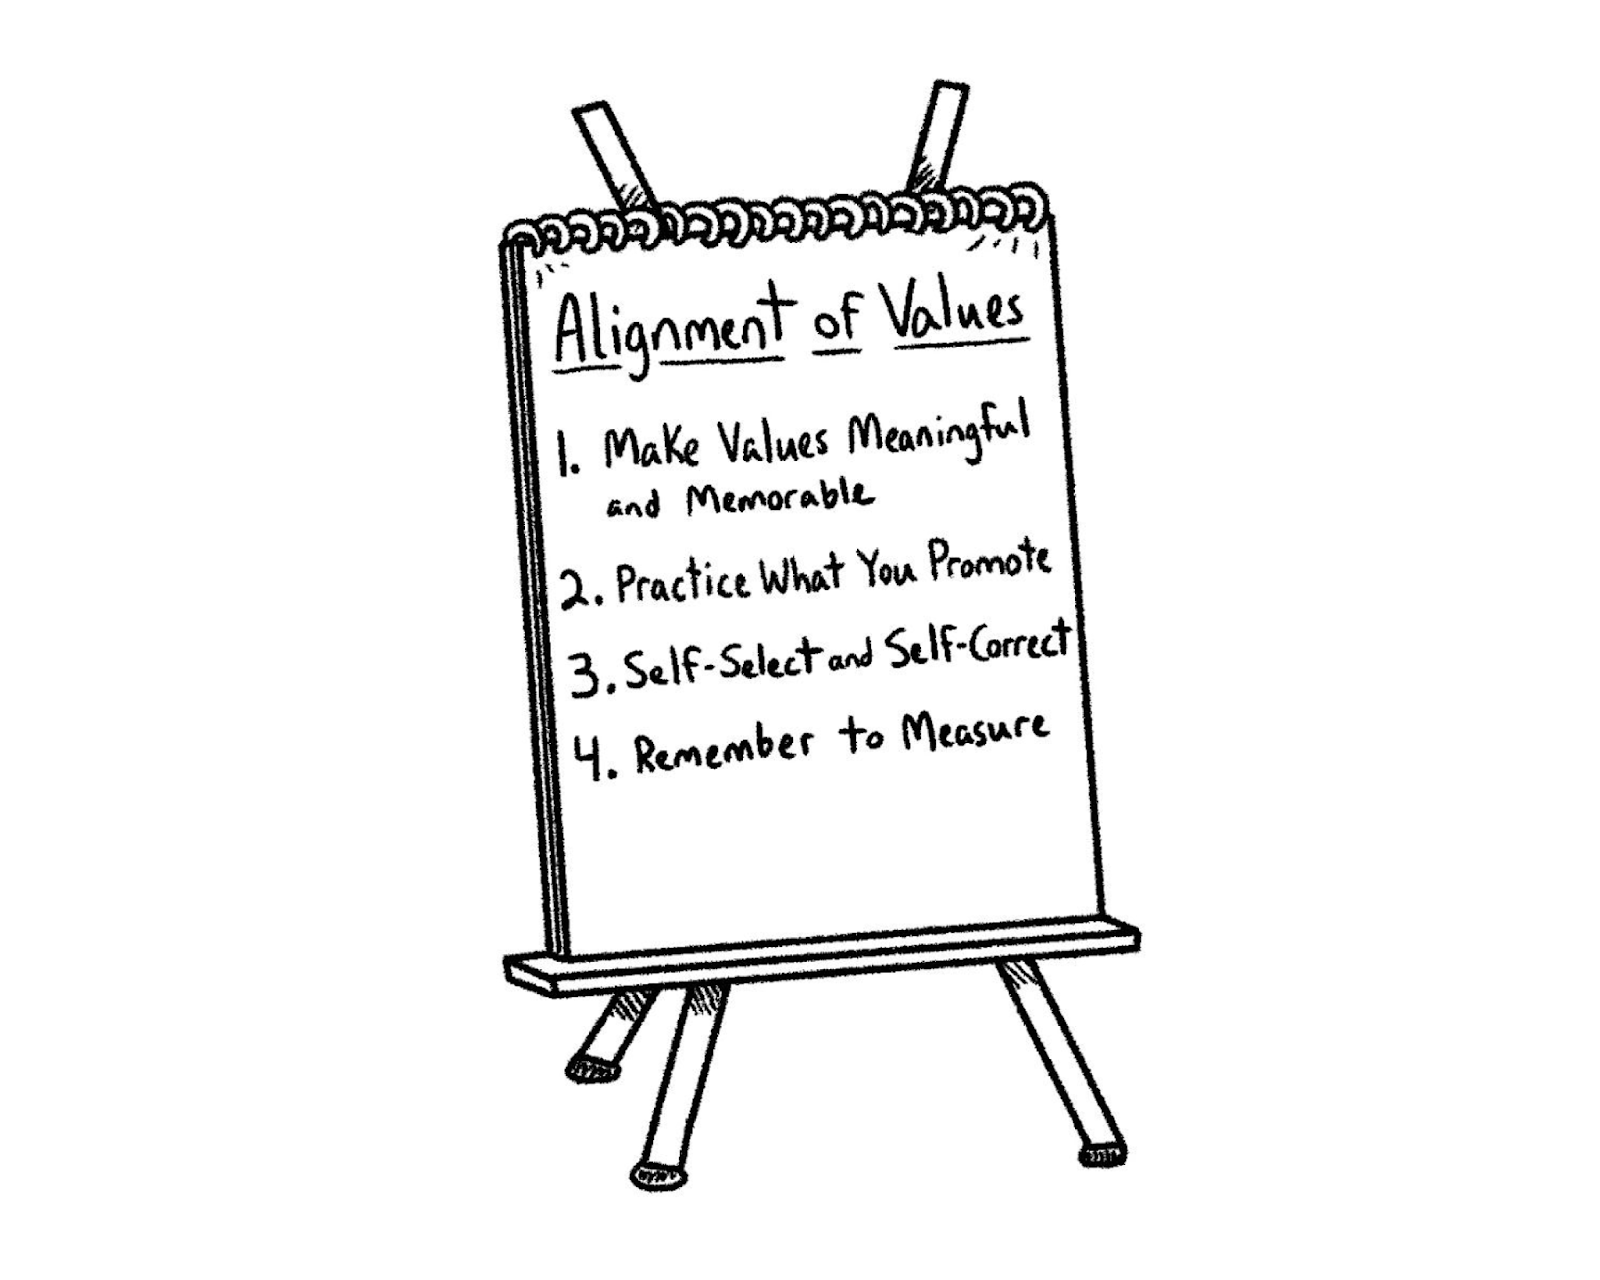 1 - Make values meaningful and memorable
2 - Practice what you promote
3 - Self-select and self-correct
4 - Remember to measure
